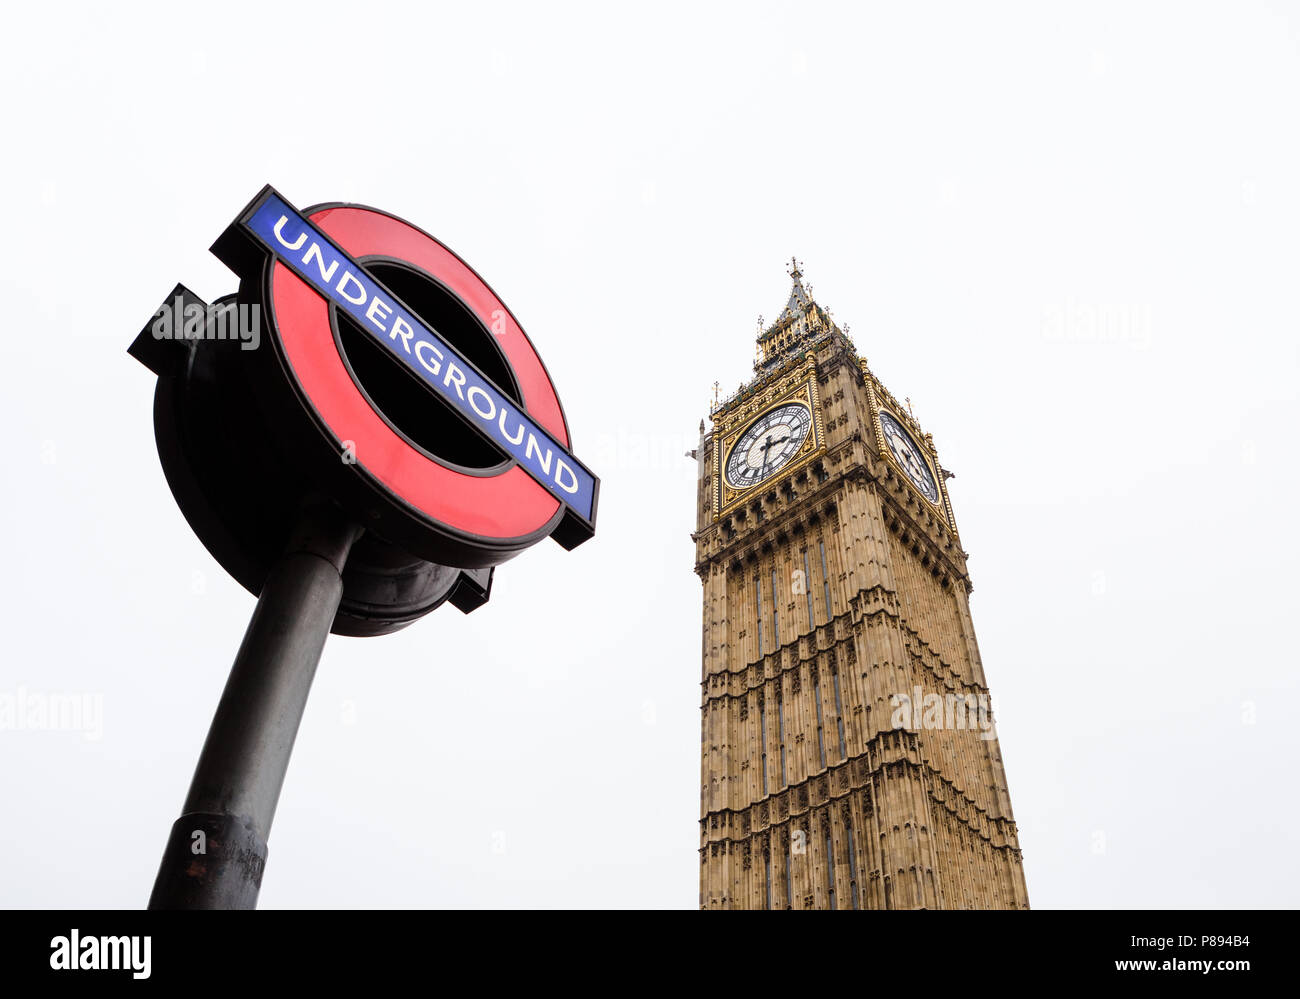 Looking up at Westminster station and underground sign and Big Ben in London against a clear sky taken with a wide angle lens Stock Photo